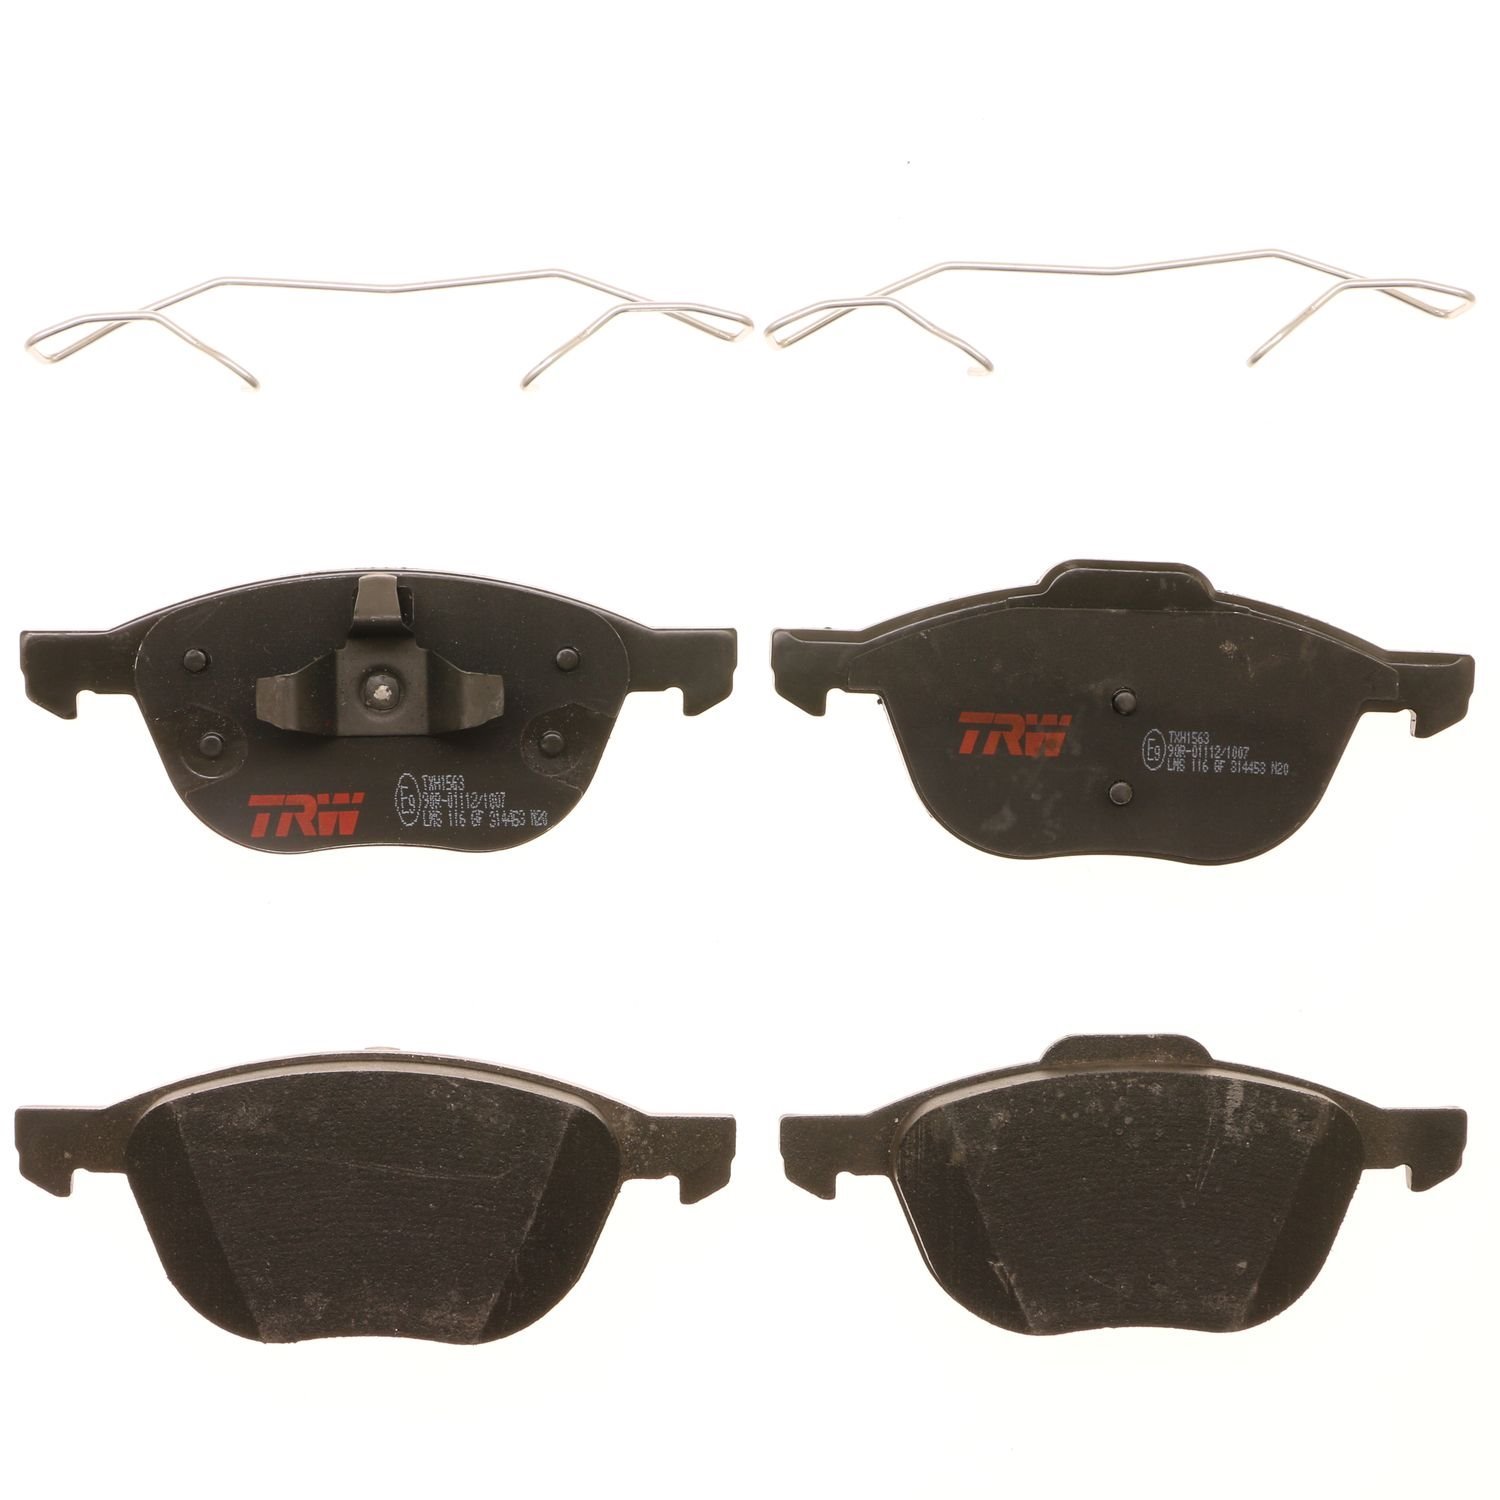 TXH1563 Ultra-Series Disc Brake Pad Set for 2013 Ford C-Max, 2014-13 Ford Escape, 2014-12 Ford Focus, Position: Front